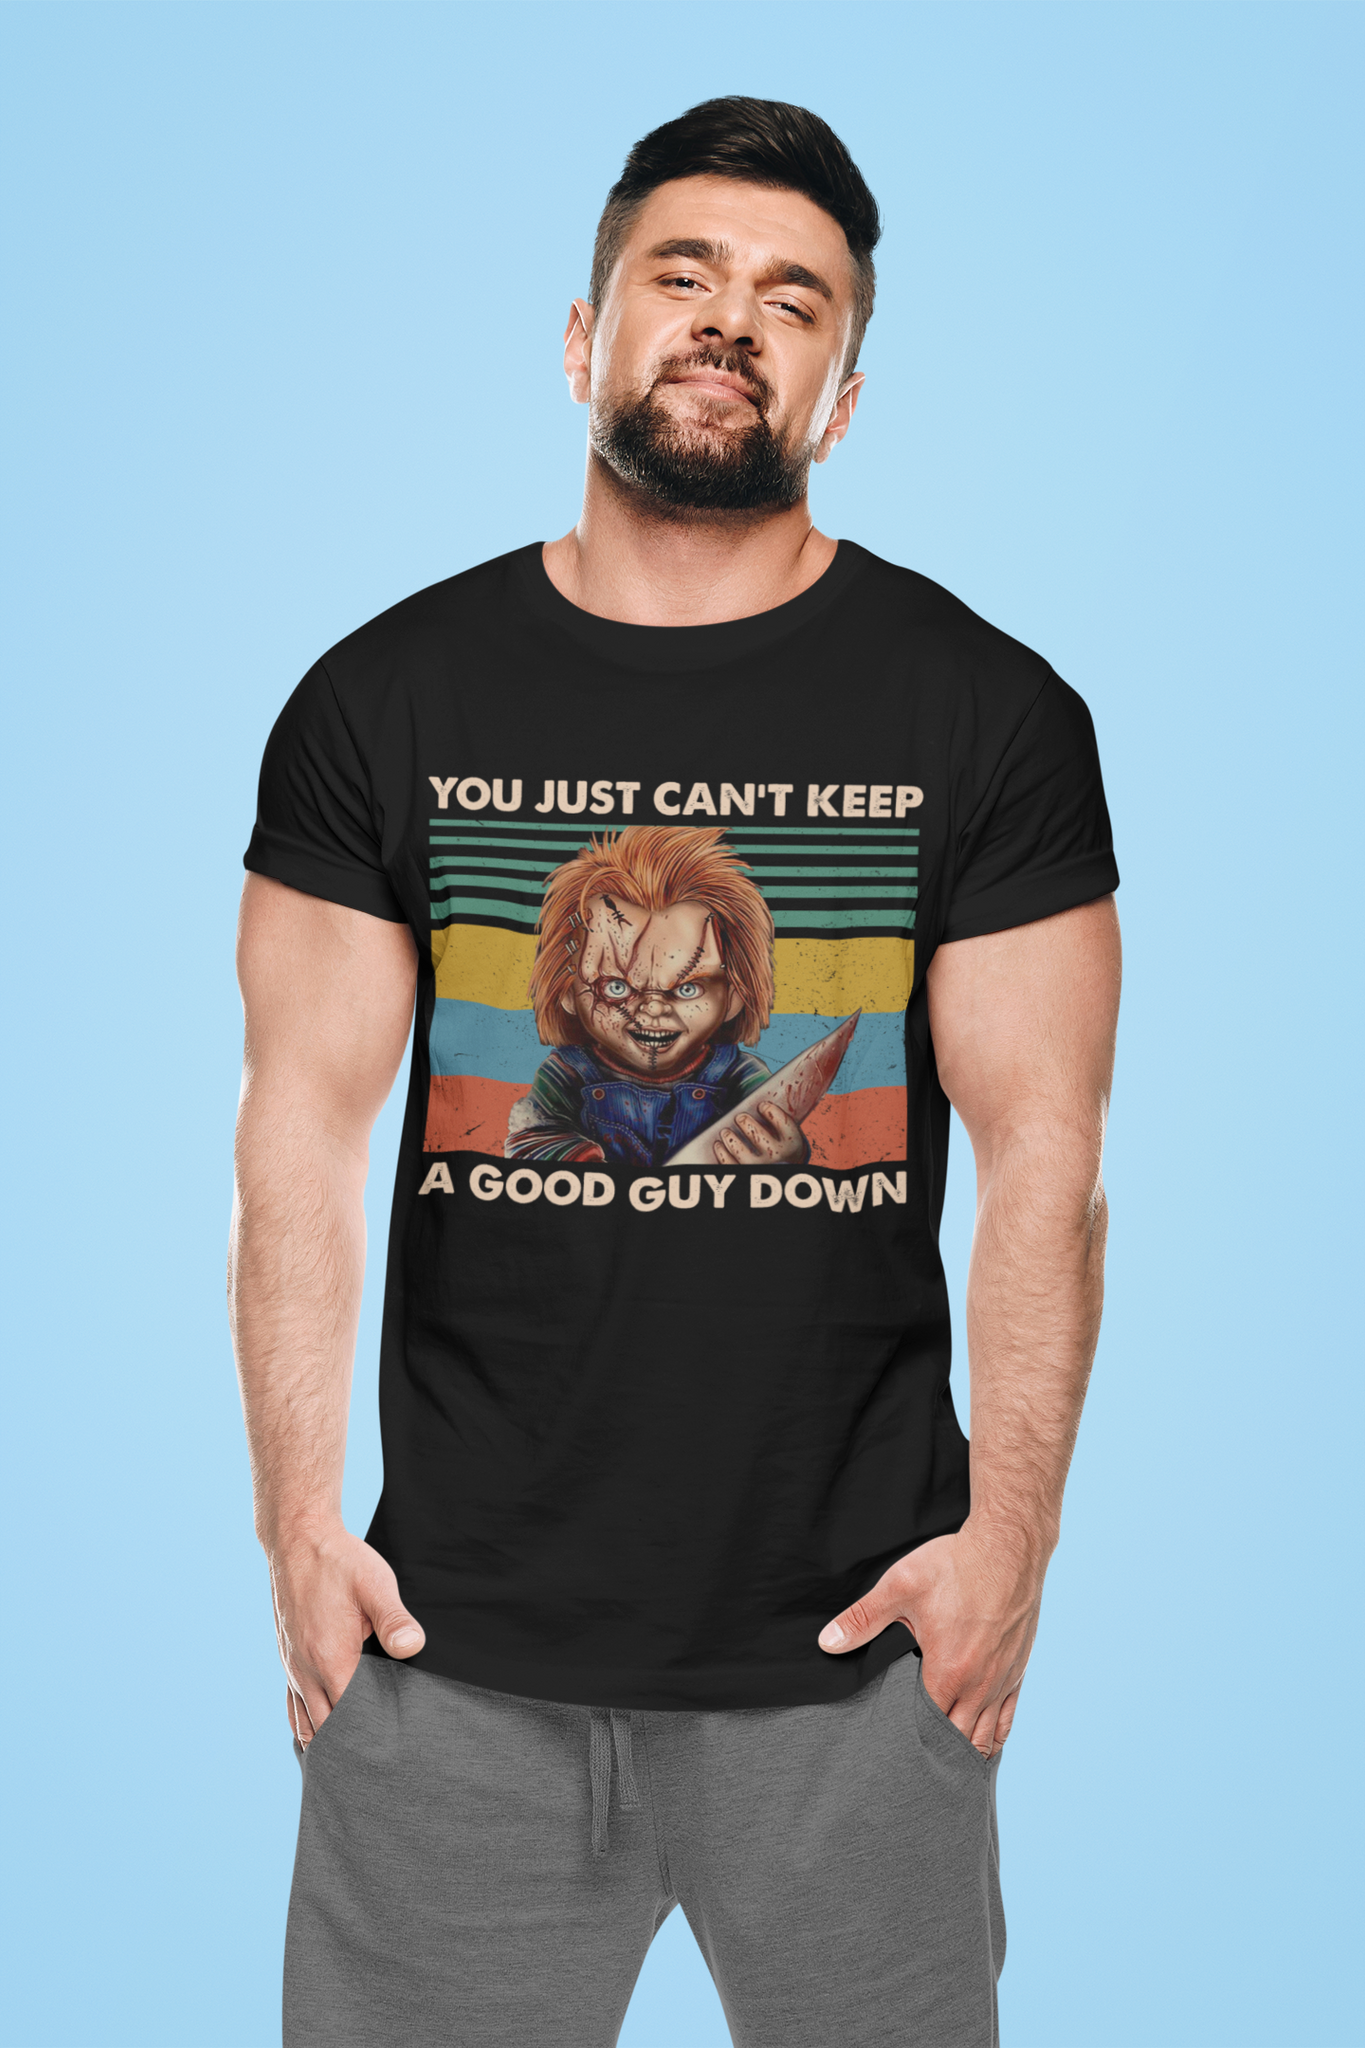 Chucky Vintage T Shirt, You Just Cant Keep A Good Guy Down T Shirt, Horror Character Shirt, Halloween Gifts